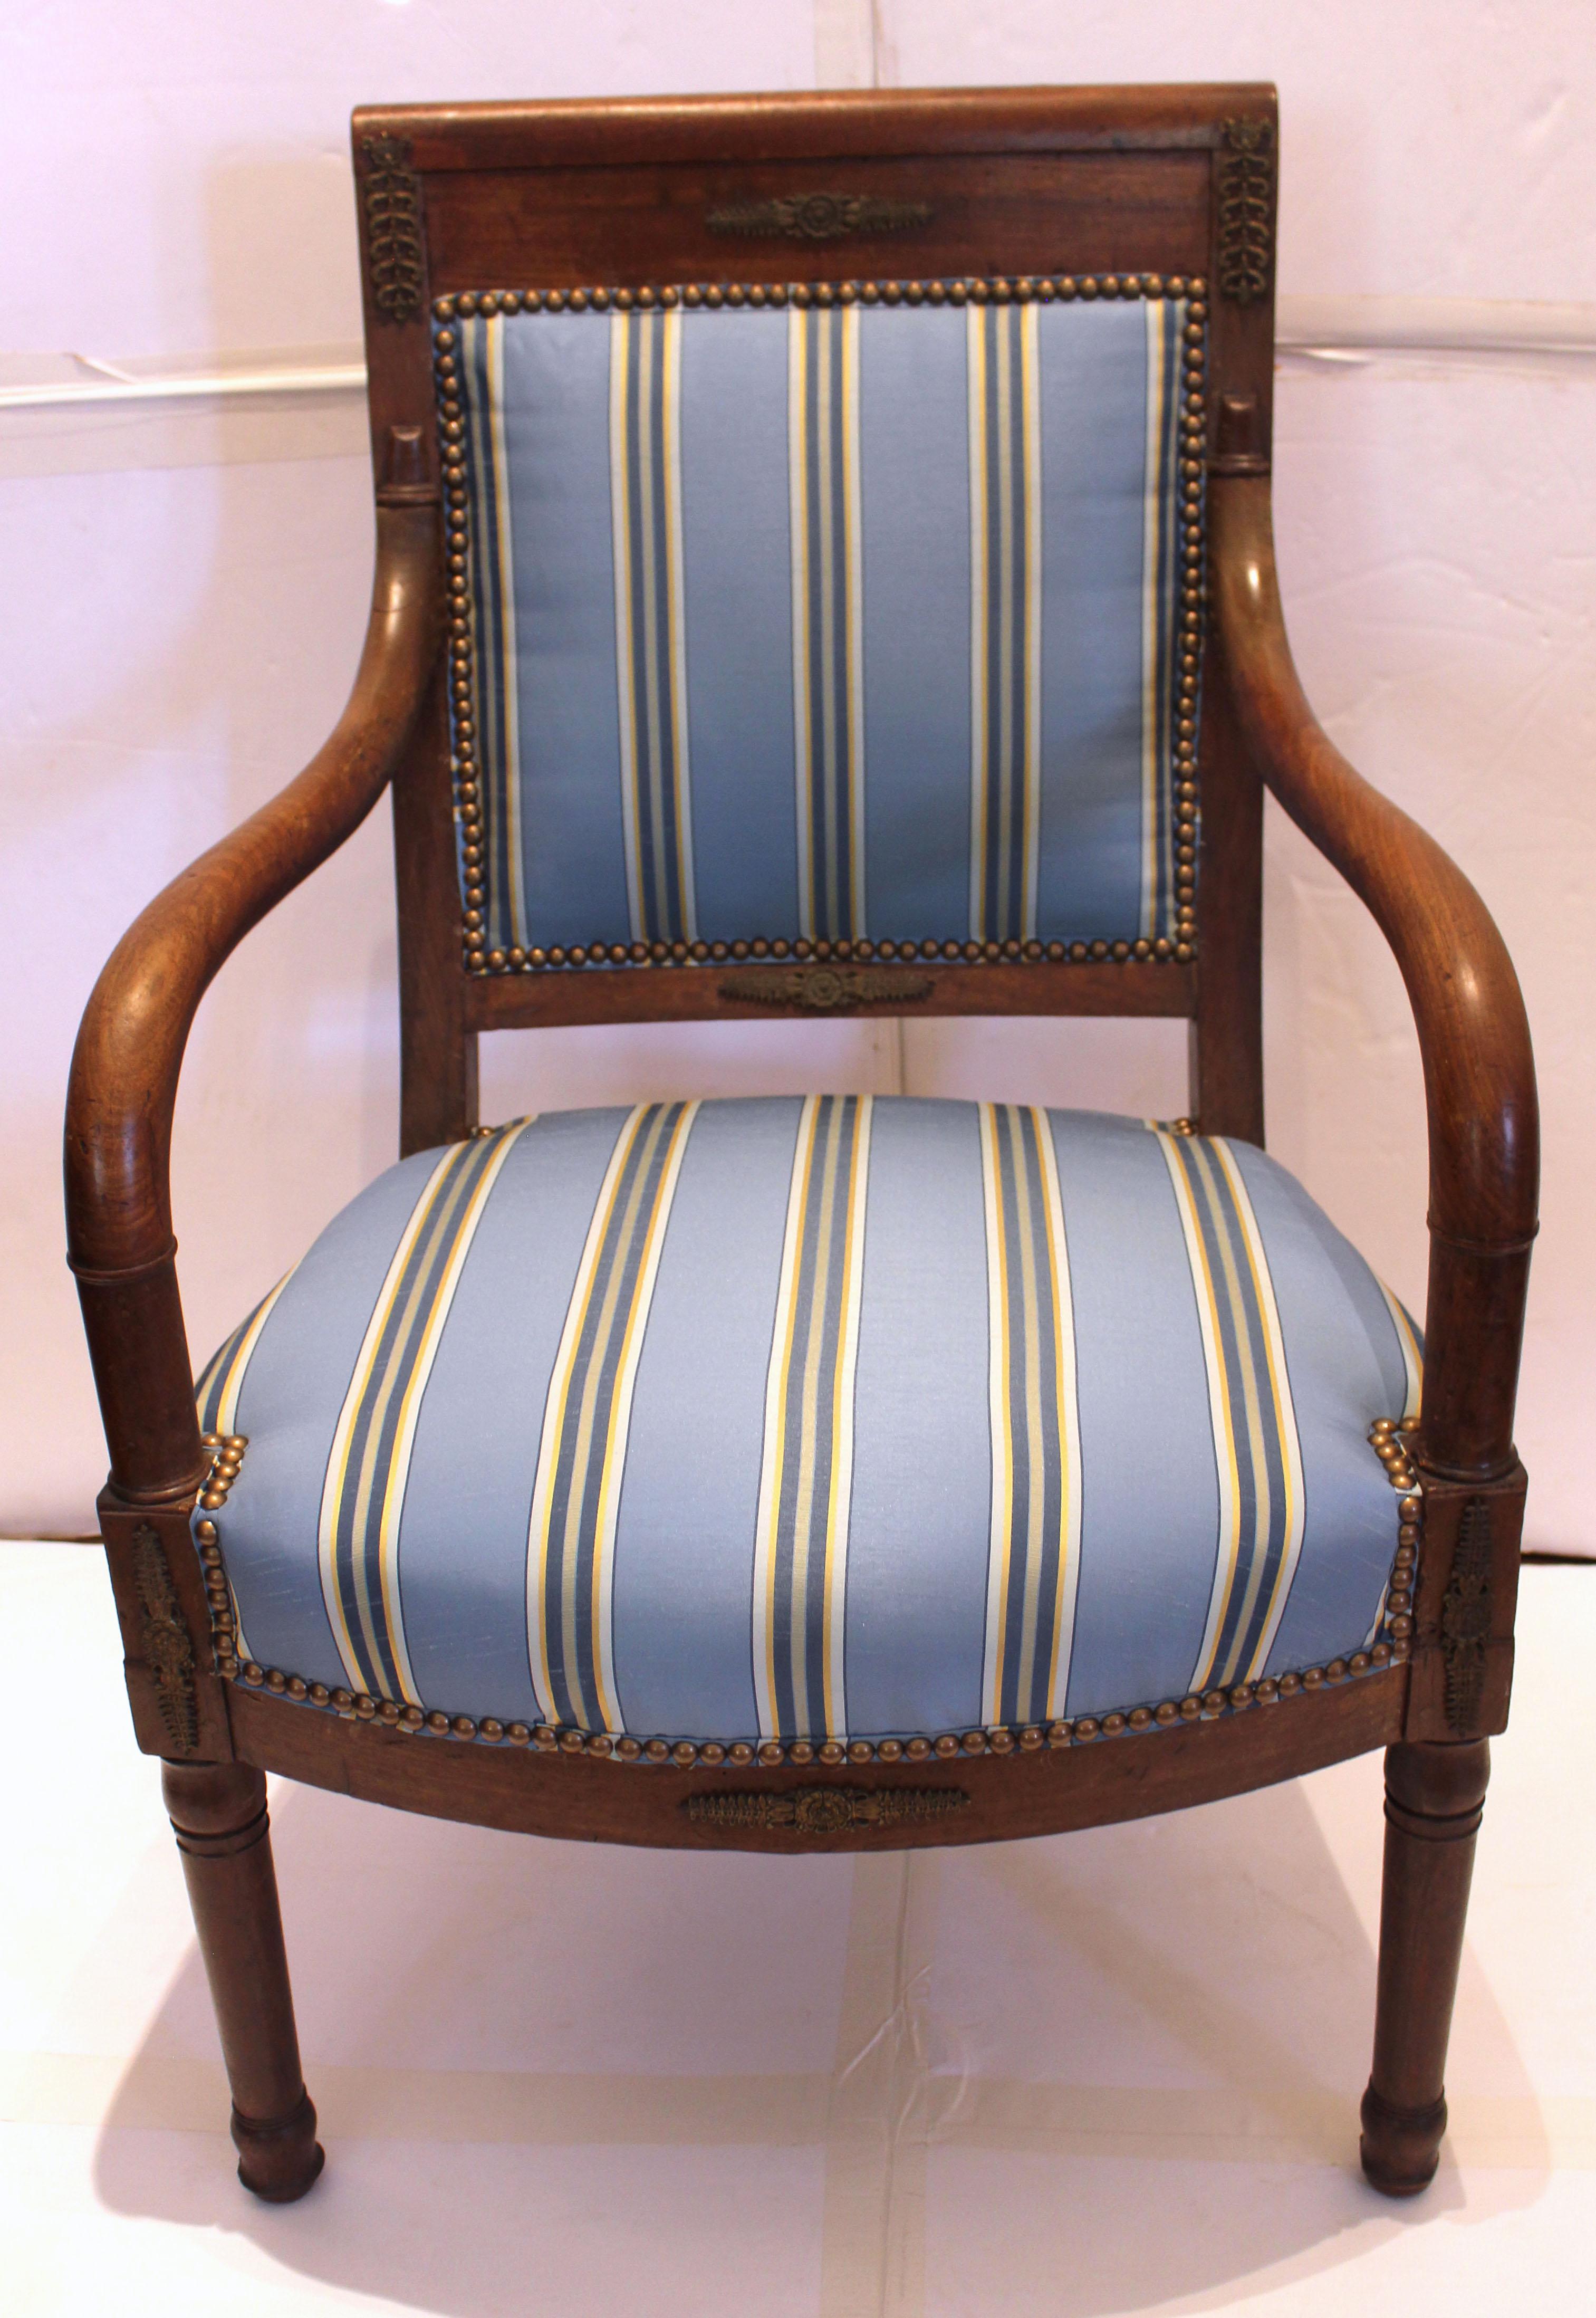 Circa 1800-1815 pair of fauteuils or open arm chairs, French. Mahogany. Directoire to Empire period & style. Brass mounts. Turned, tapered legs with ring turned carving. Old repair to one upper arm. Newly upholstered in a blue silk fabric with